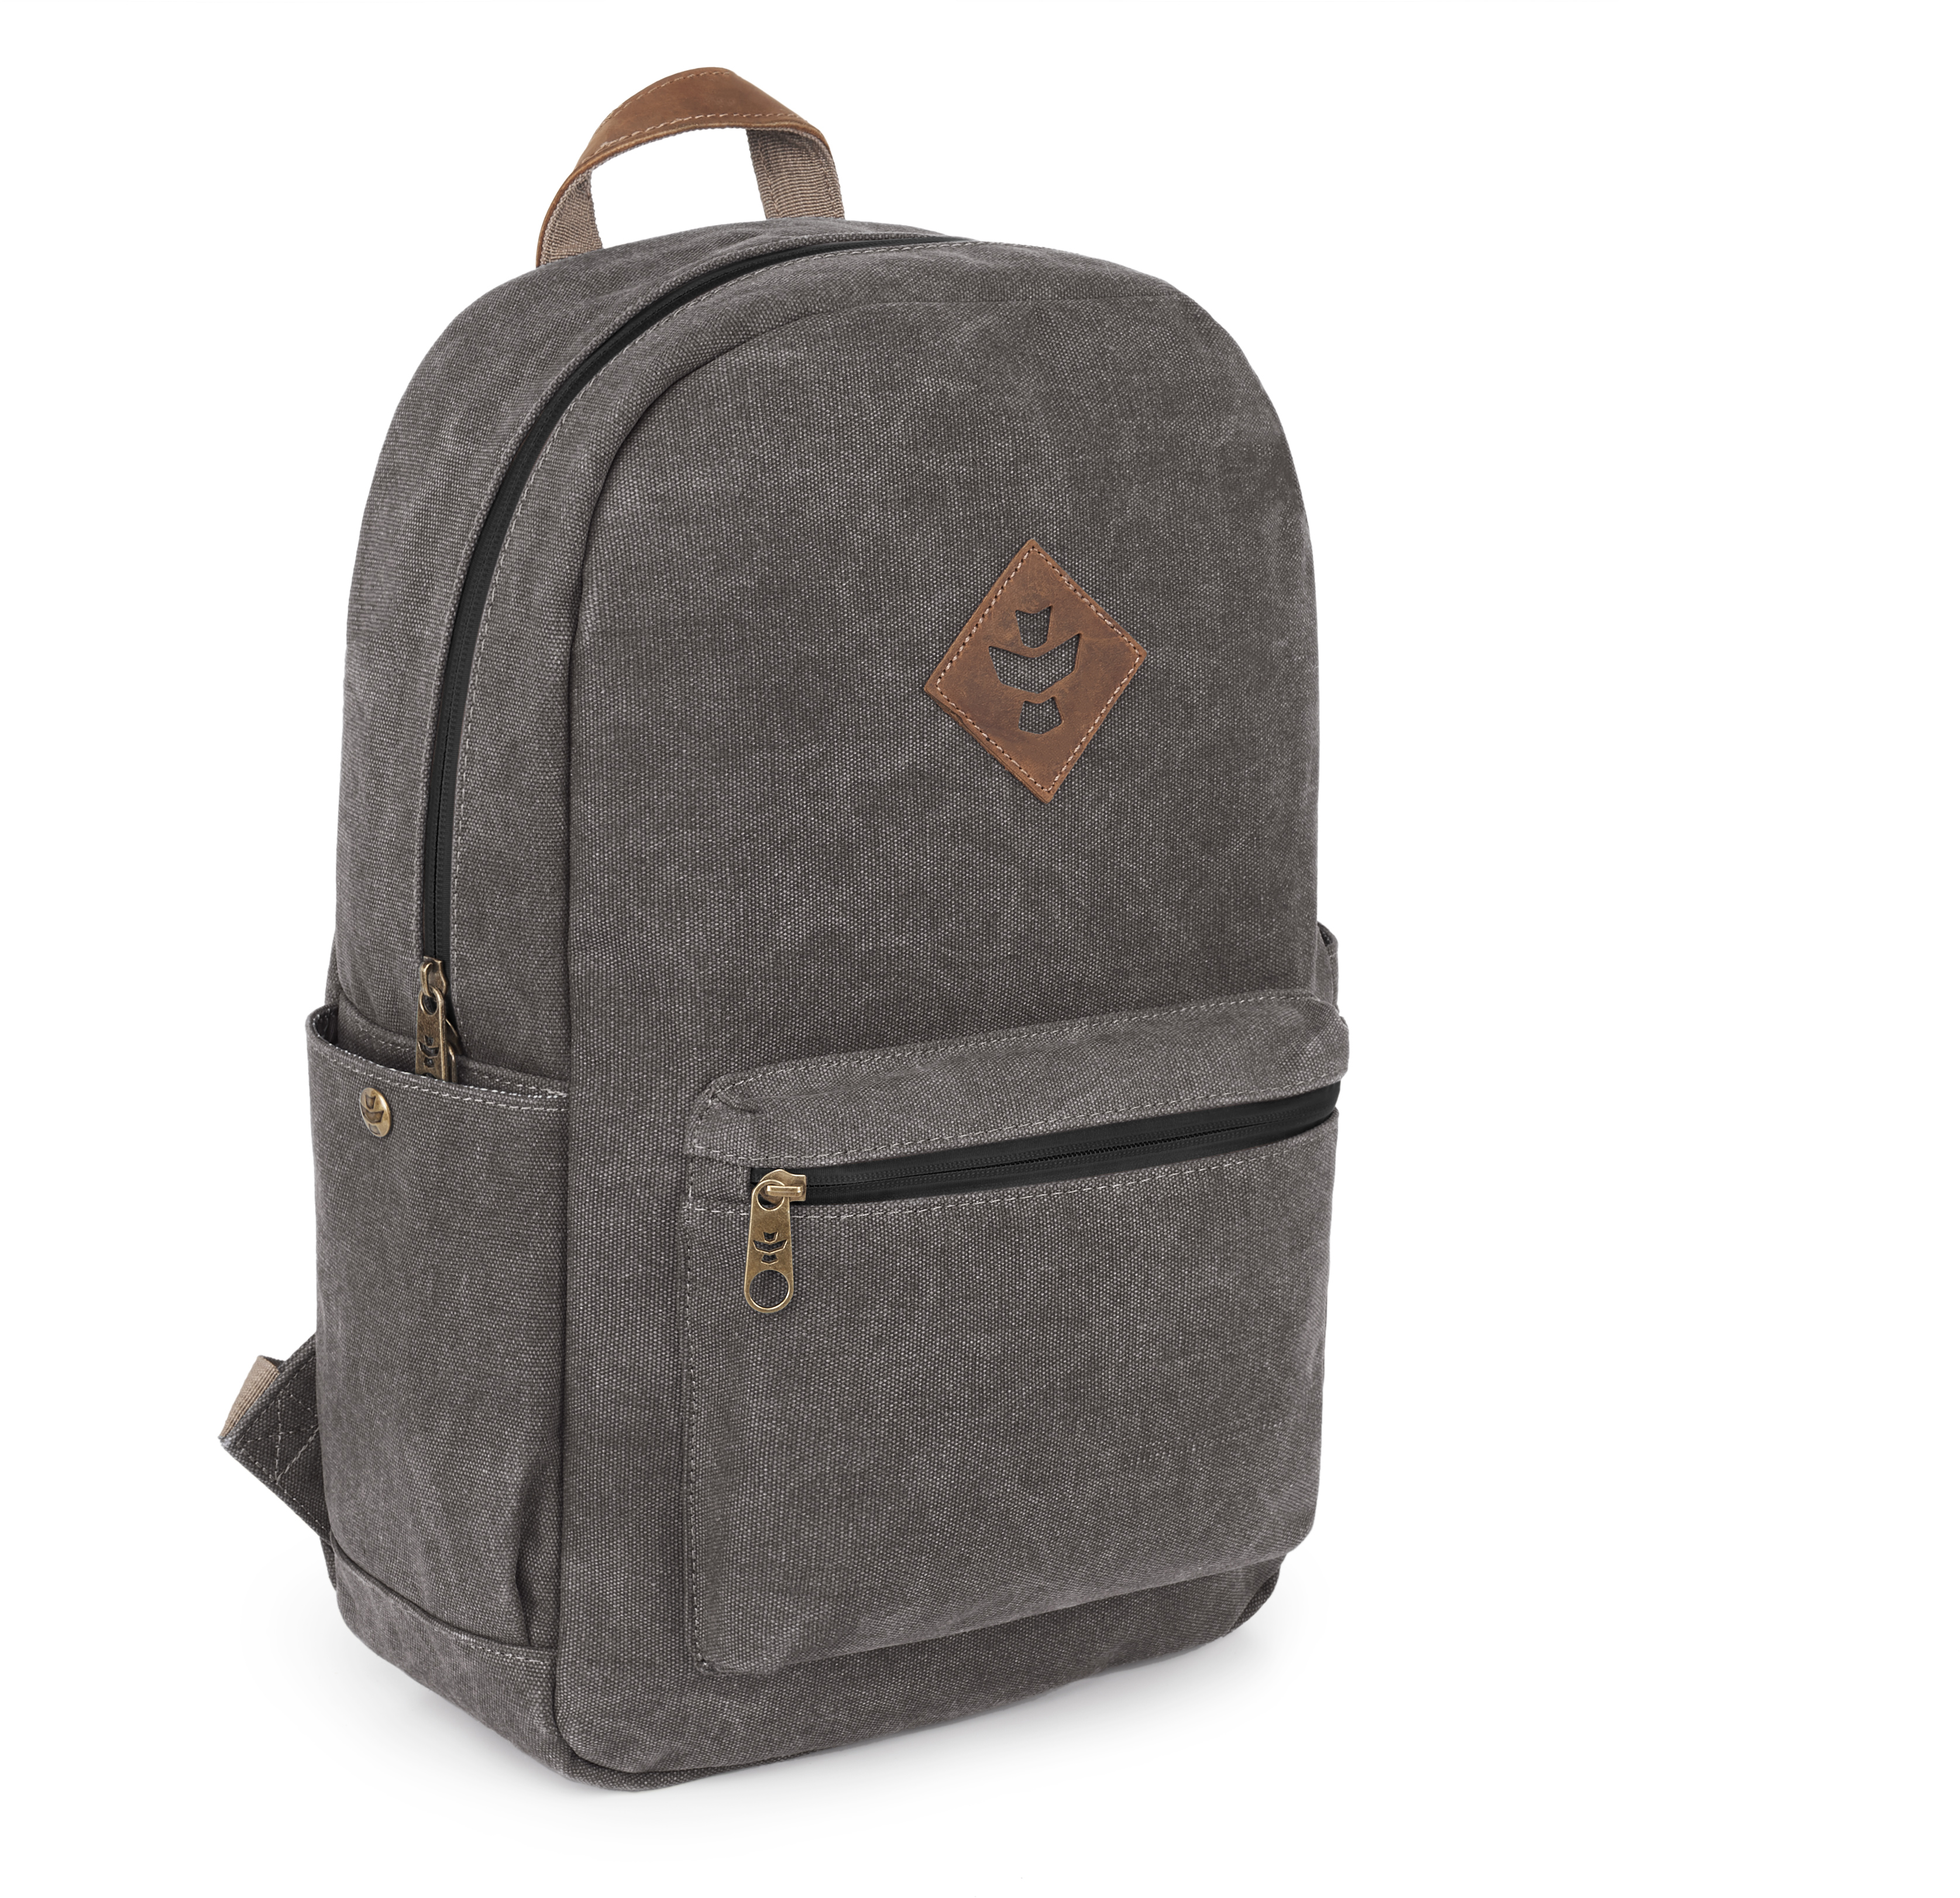 Picture for Revelry Supply The Escort Backpack, Ash